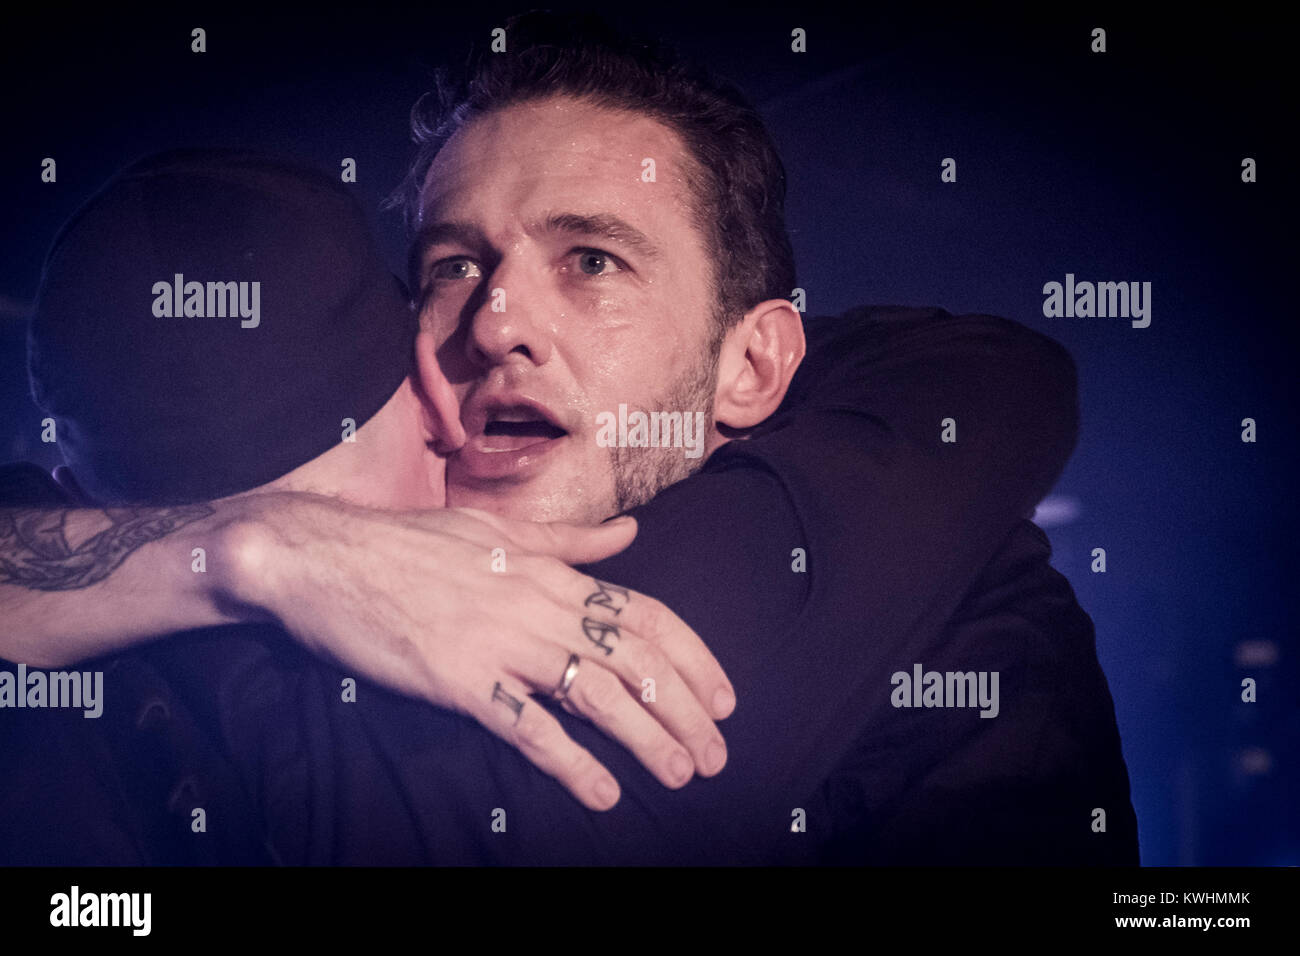 The Norwegian punk rock band The Dogs performs a live concert at BETA in Copenhagen. Here vocalist Kristopher Schau is seen live on stage. Denmark, 10/02 2017. Stock Photo